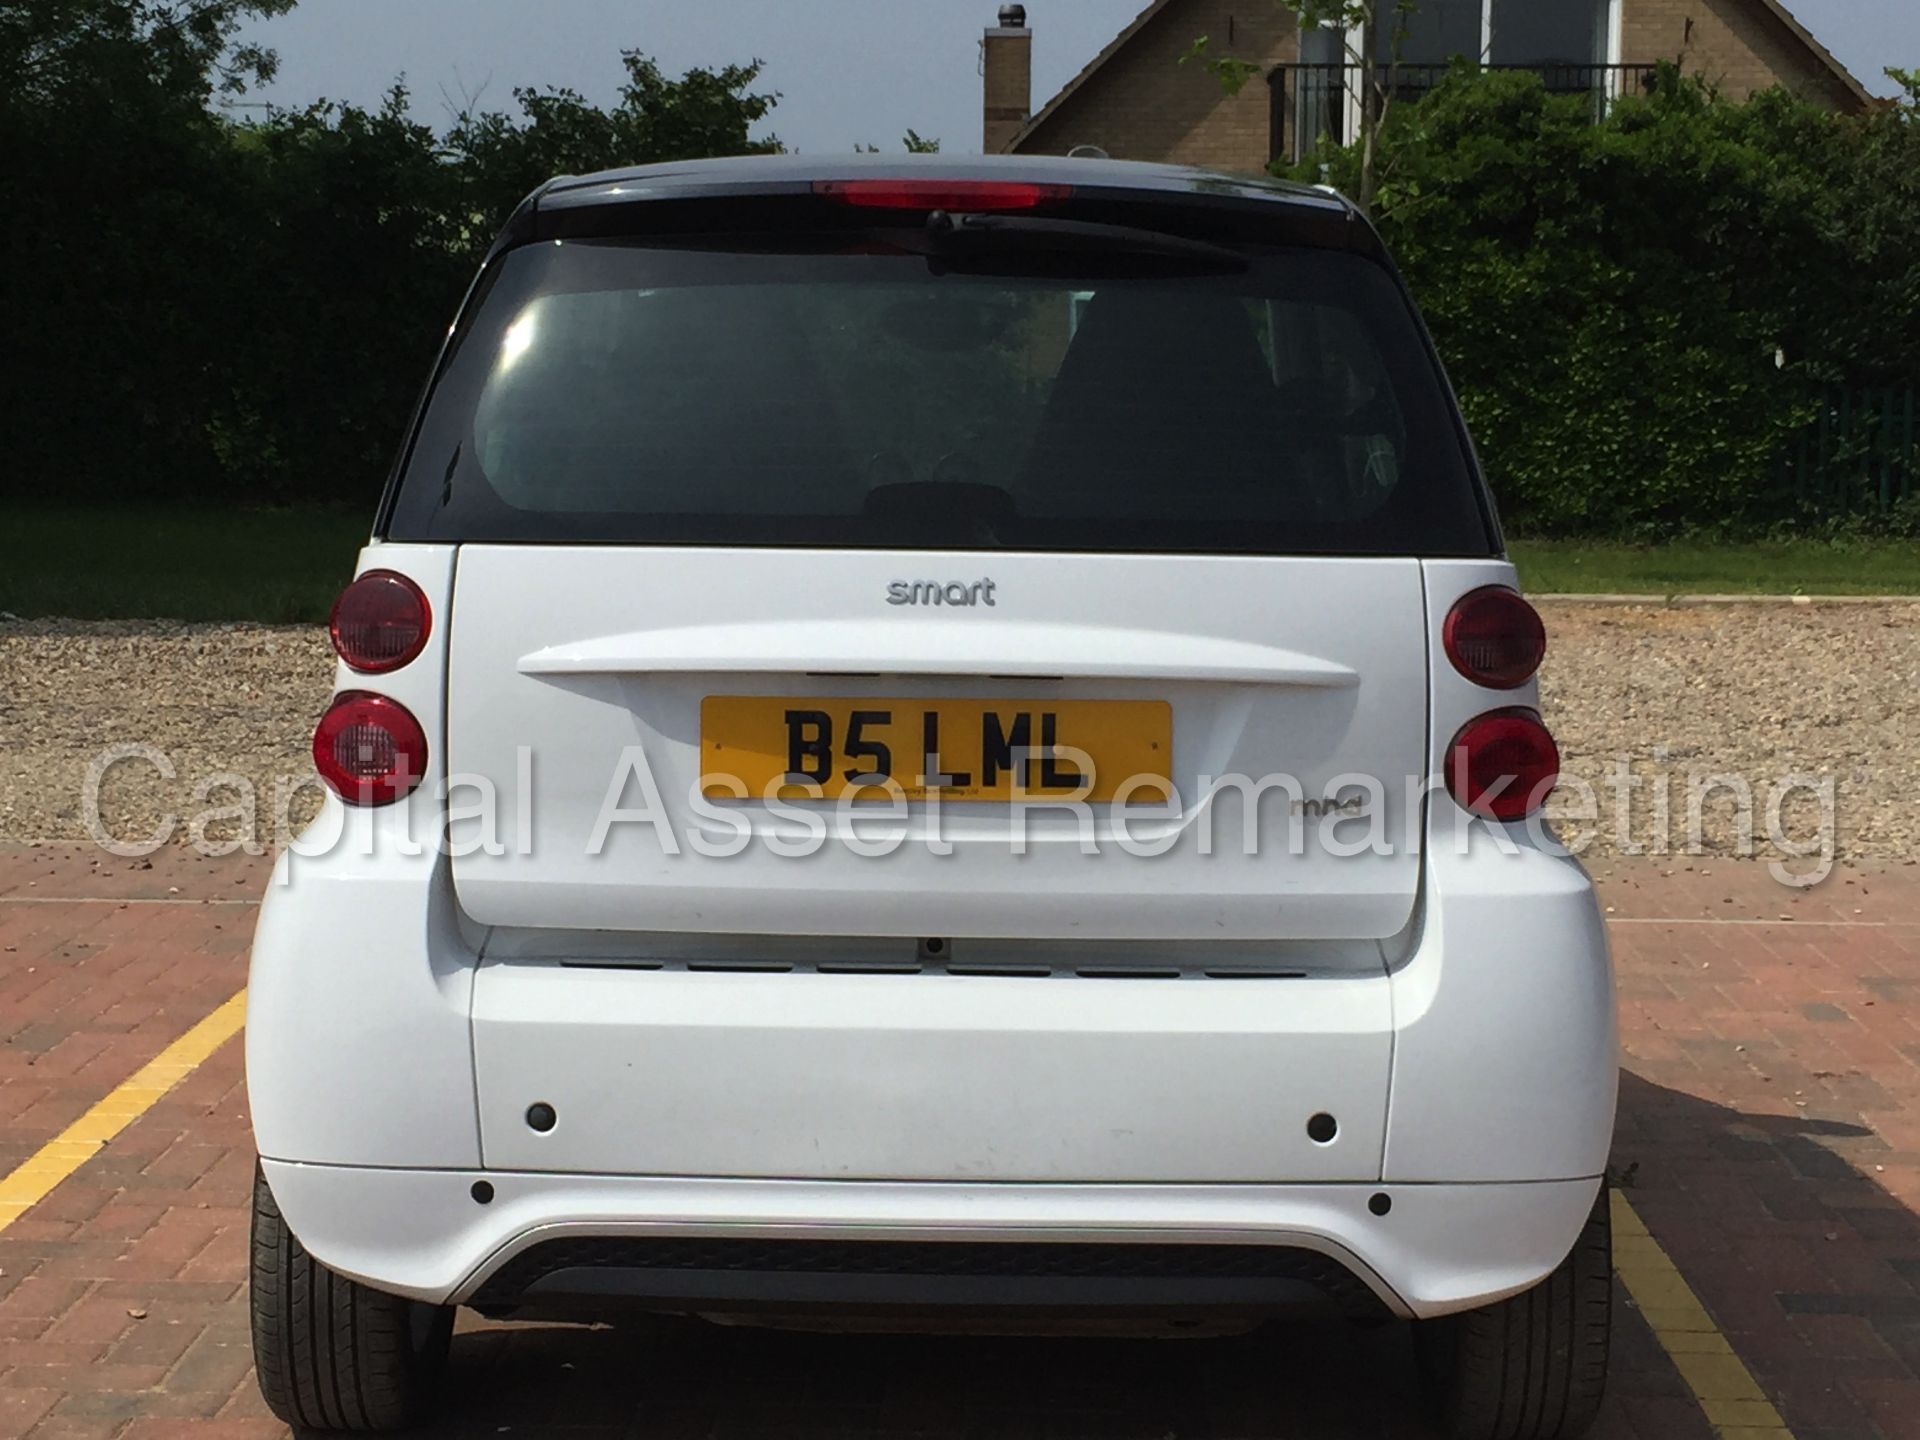 (On Sale) SMART FORTWO 'PASSION' (2013 MODEL) 'MHD - AUTO - SAT NAV - AIR CON' *1 OWNER* (NO VAT) - Image 6 of 28